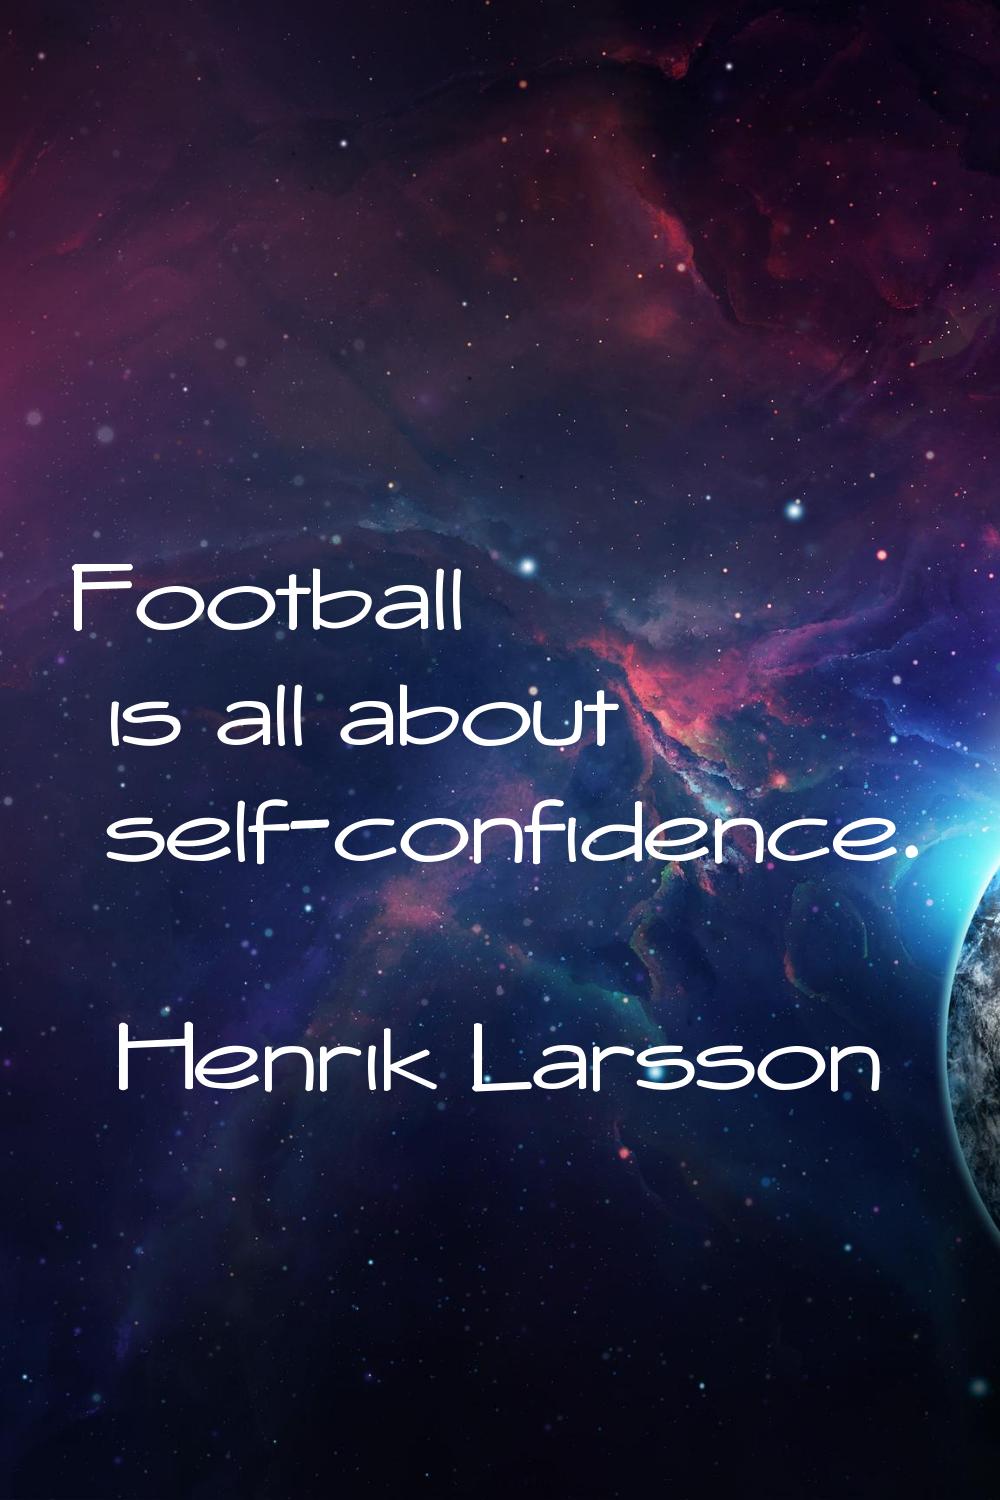 Football is all about self-confidence.